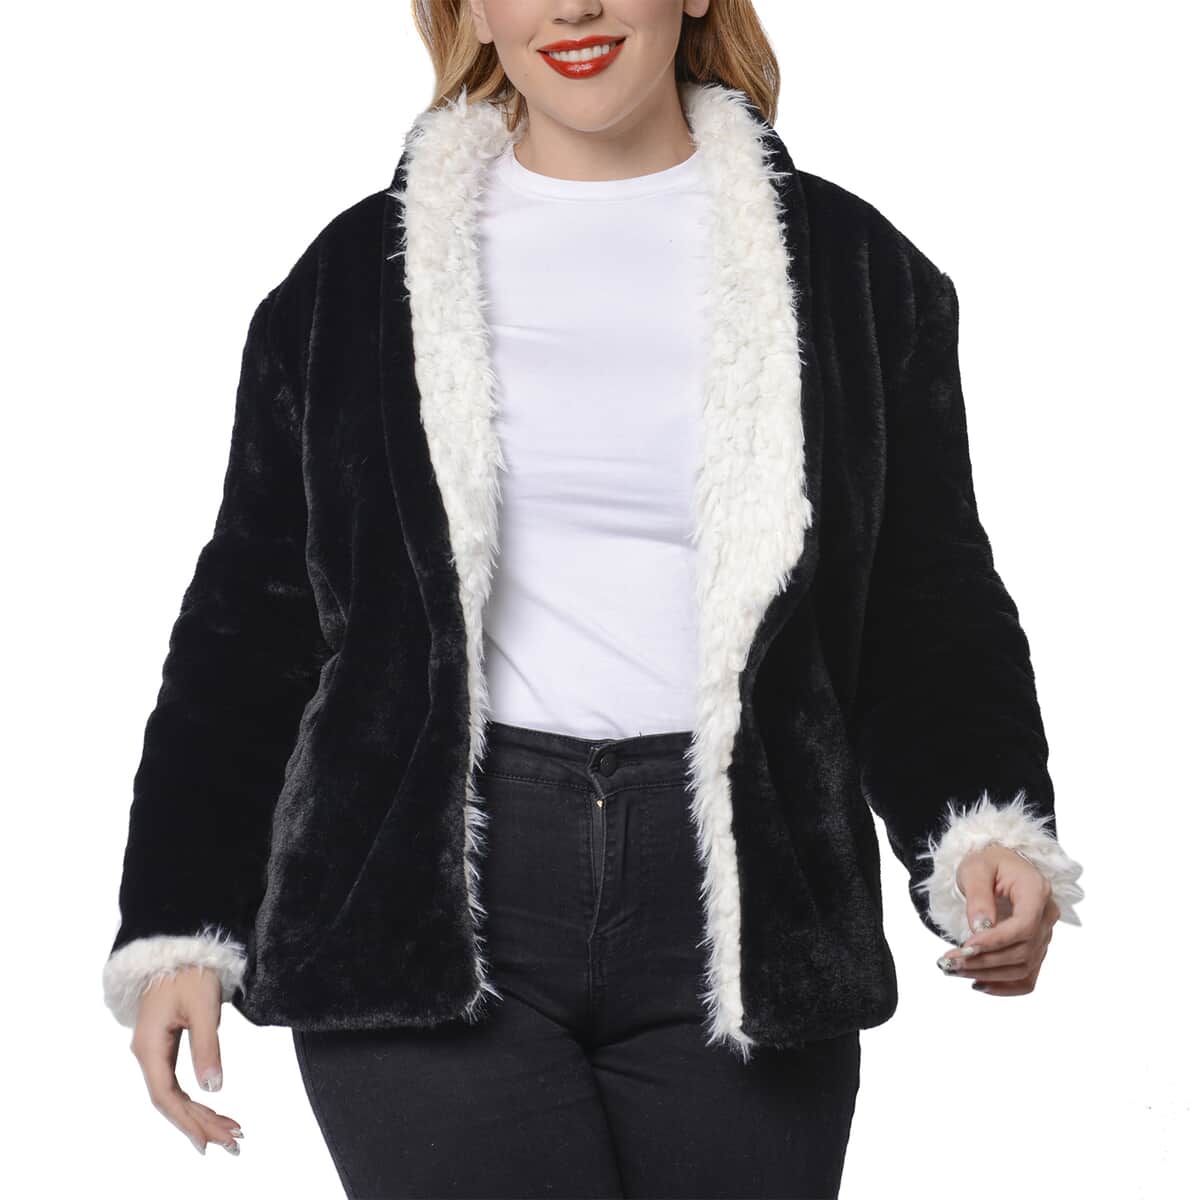 PASSAGE Black And White Reversible Womens Coat With Shawl Collar And Long Sleeves (M, 100% Polyester) image number 0